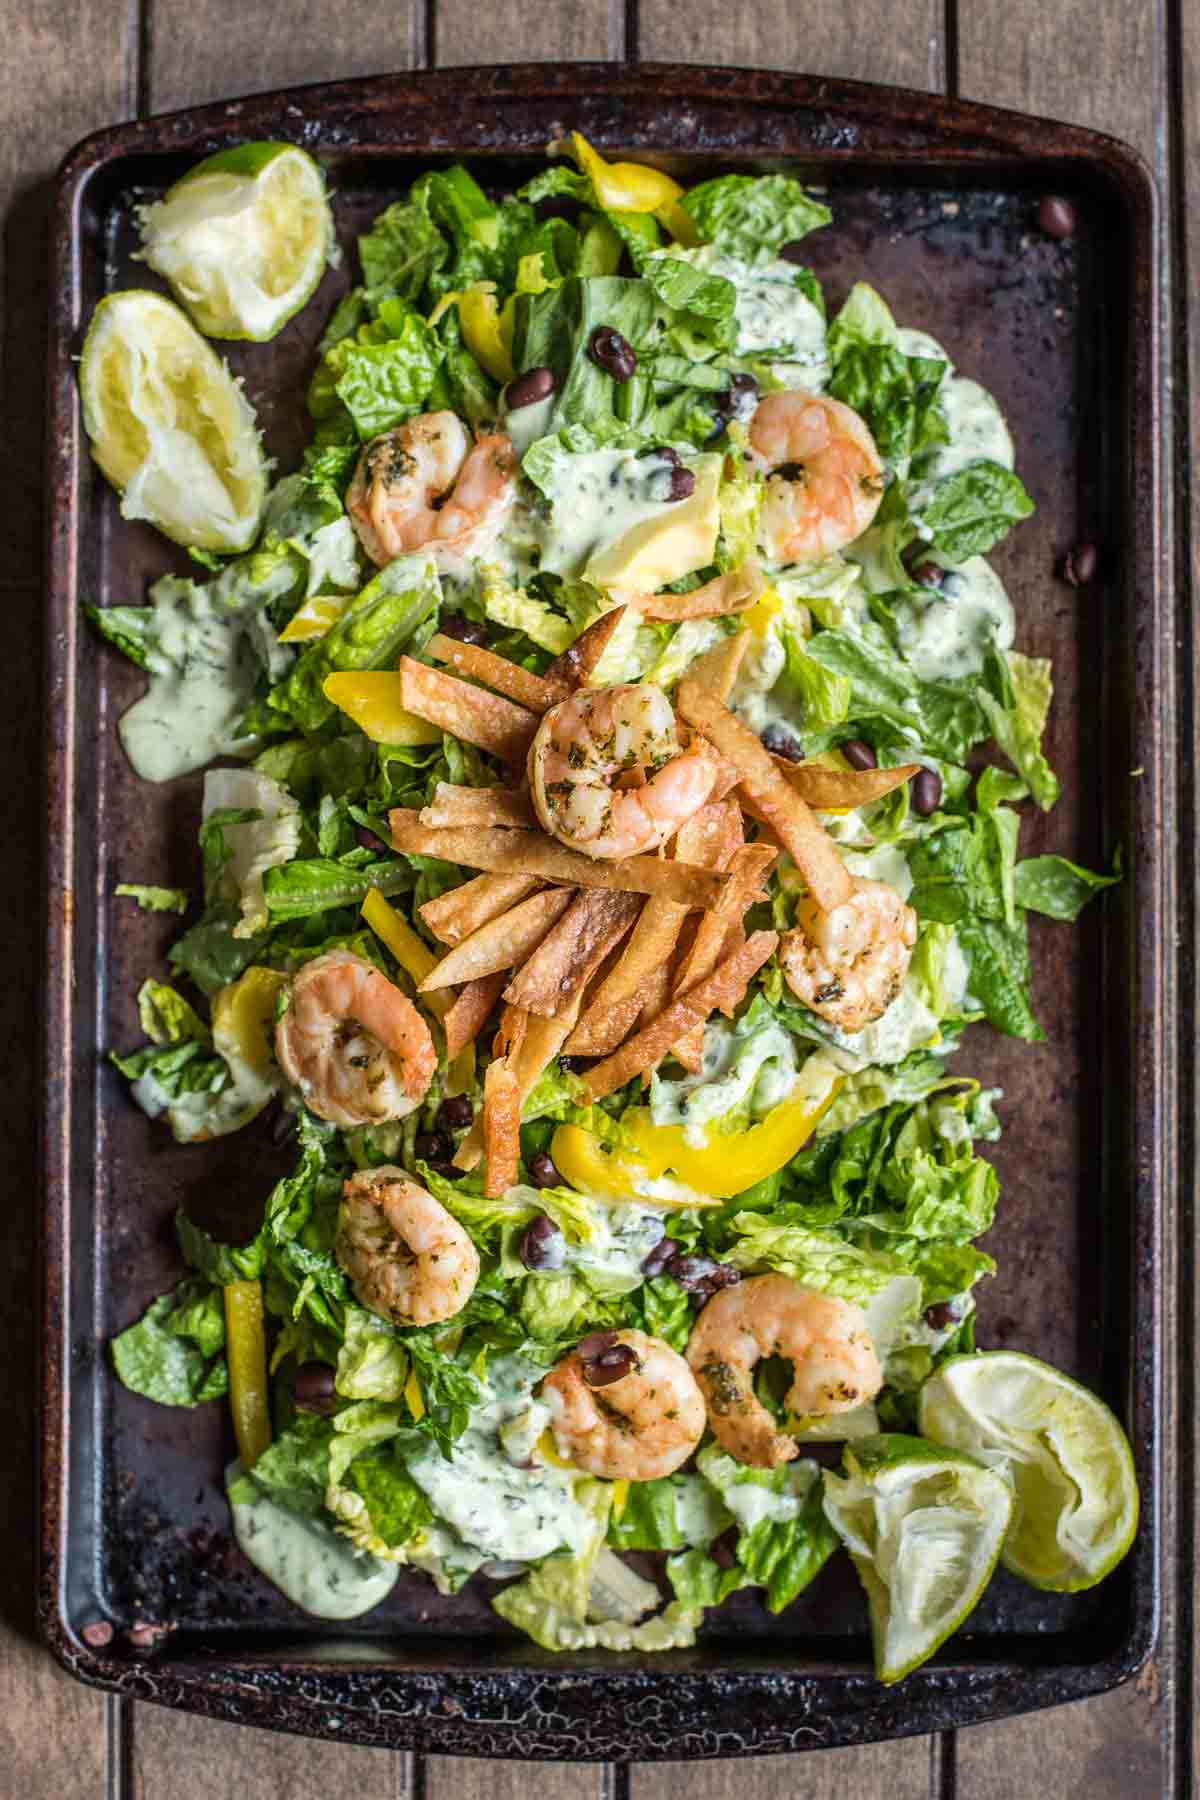 This Shrimp Taco Salad is loaded with spicy shrimp, crispy tortilla strips, bell pepper, and a creamy avocado dressing.